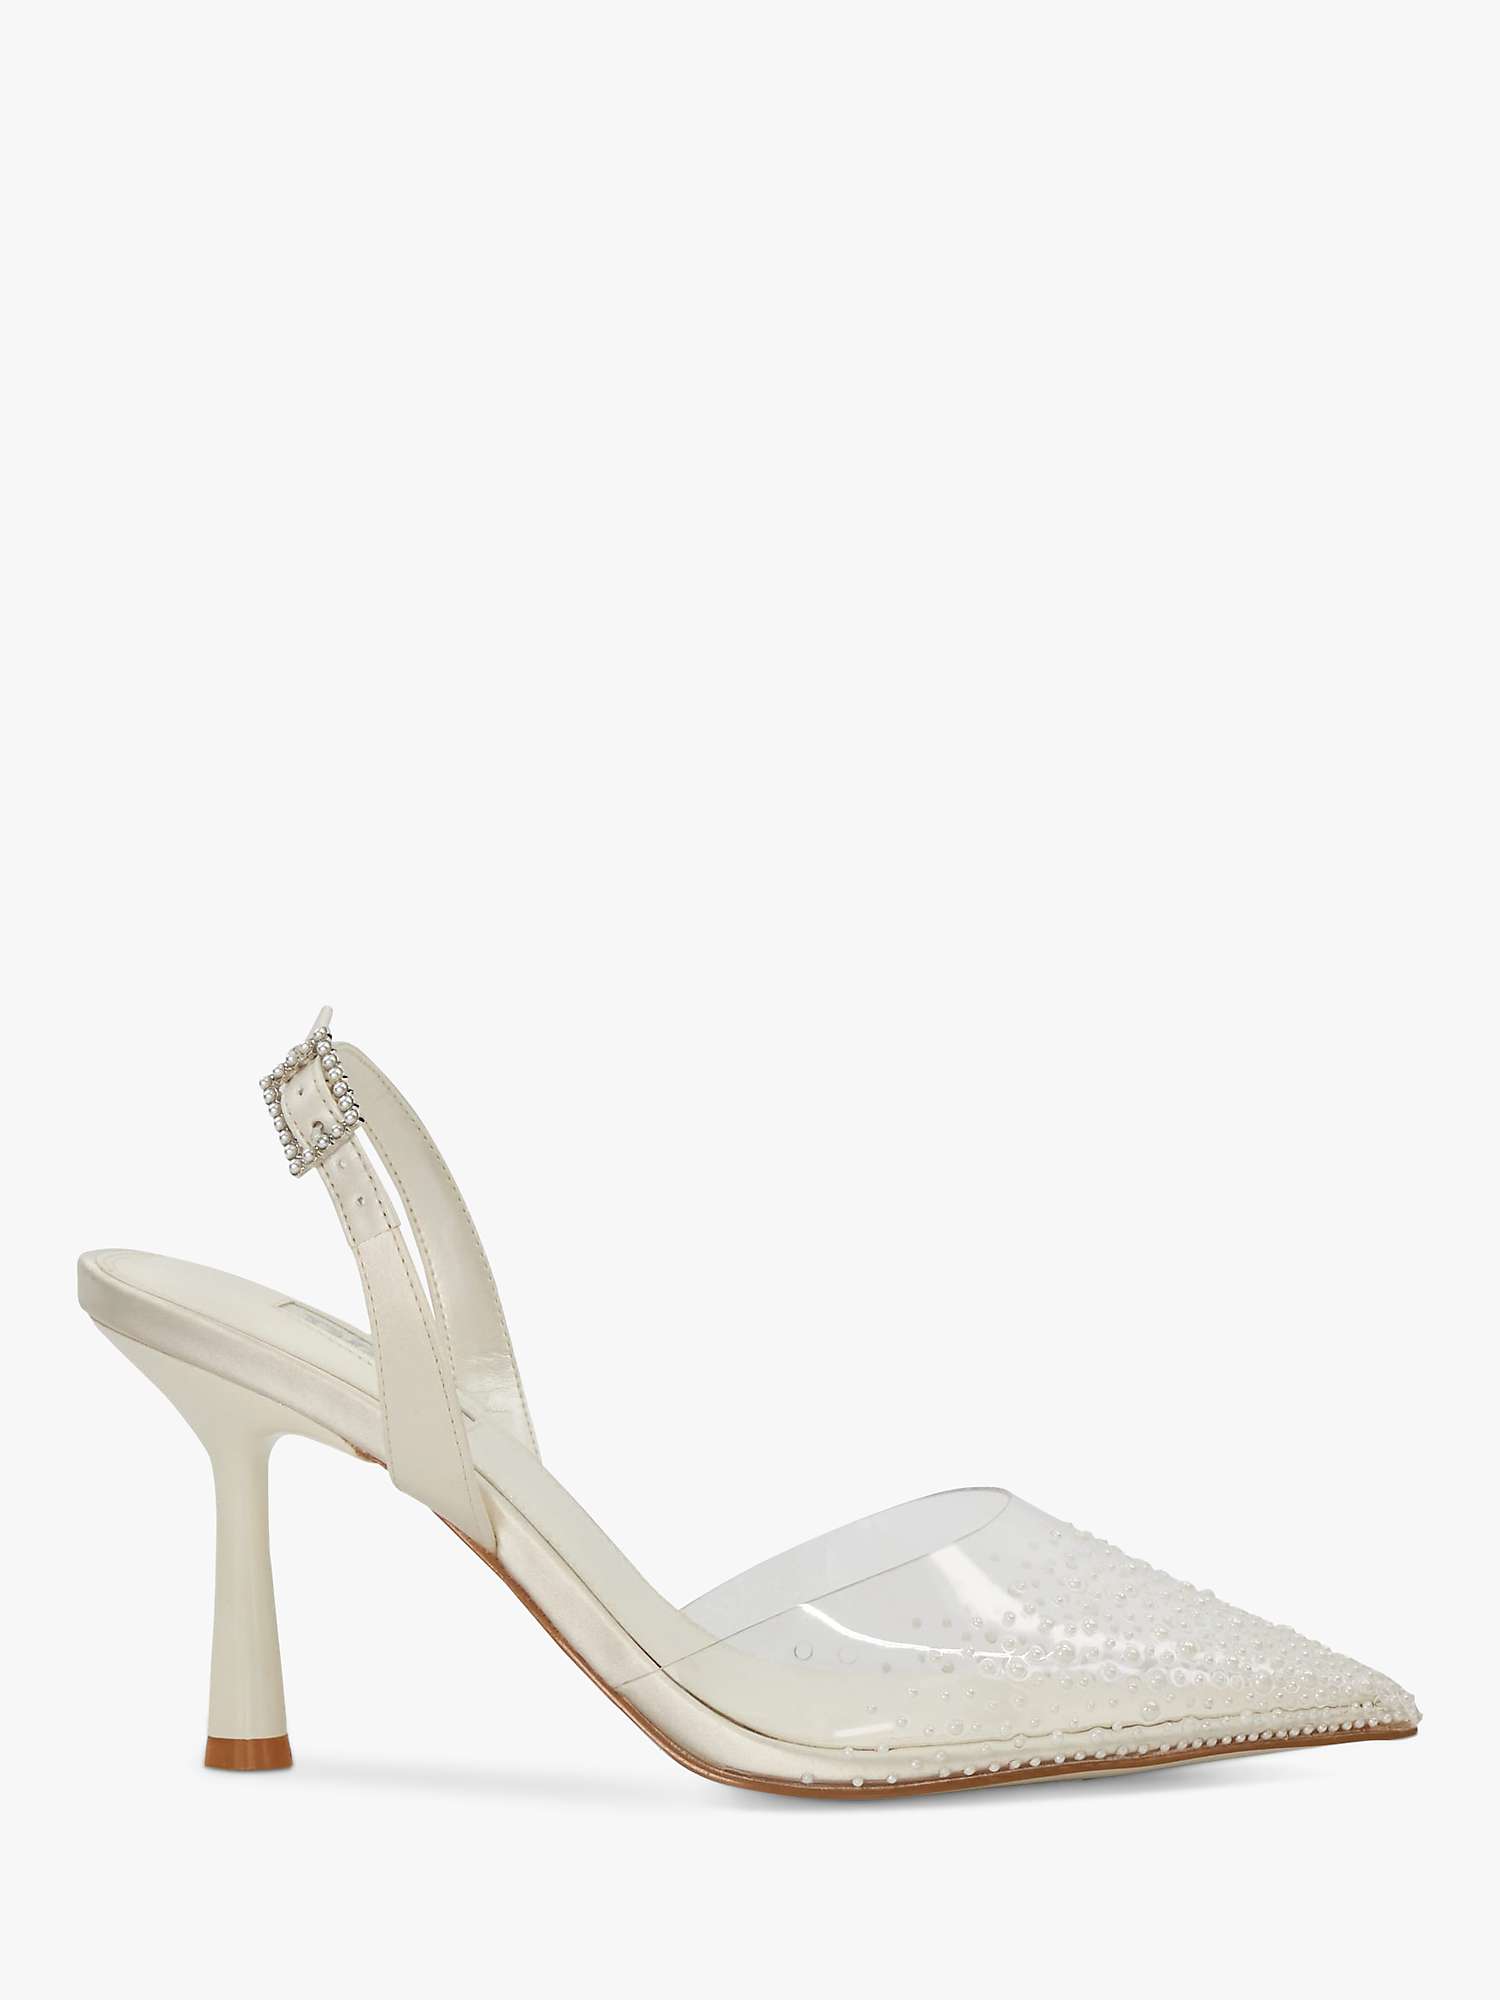 Buy Dune Bridal Collection Divinely Sea Pearl Slingback Court Shoes, Ivory Online at johnlewis.com